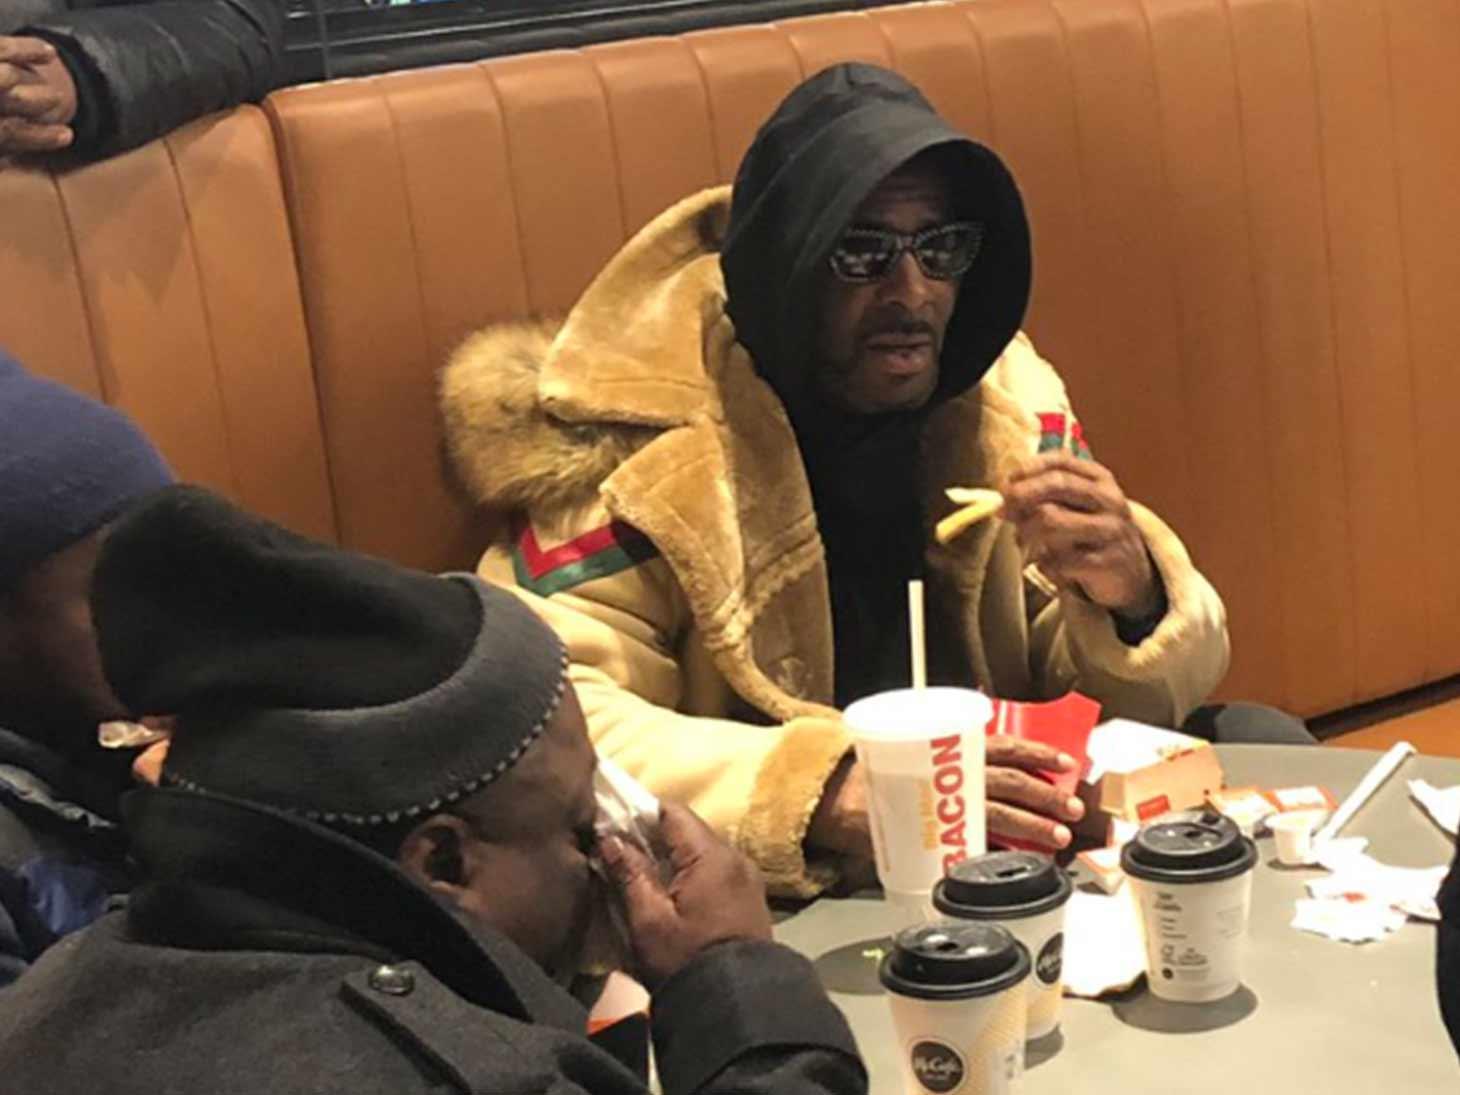 R. Kelly Visits Infamous McDonald’s After Getting Released From Jail